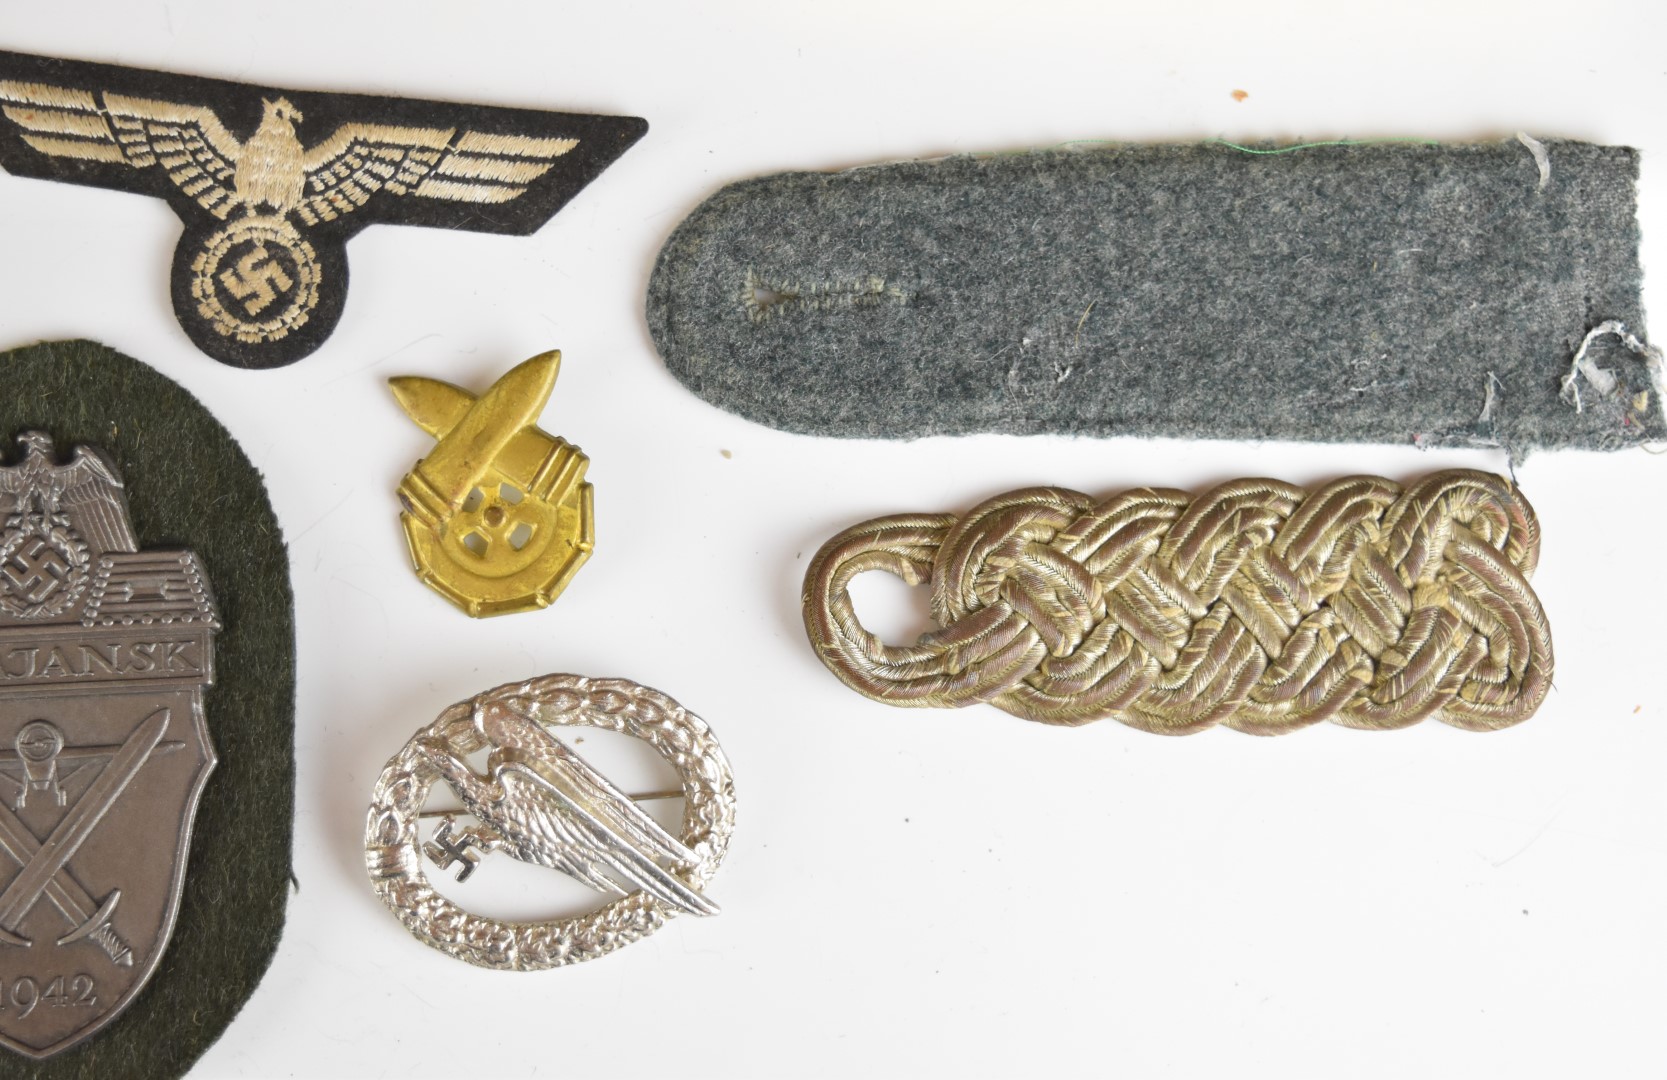 Mainly reproduction German WW2 Nazi insignia, booklets etc - Image 2 of 16